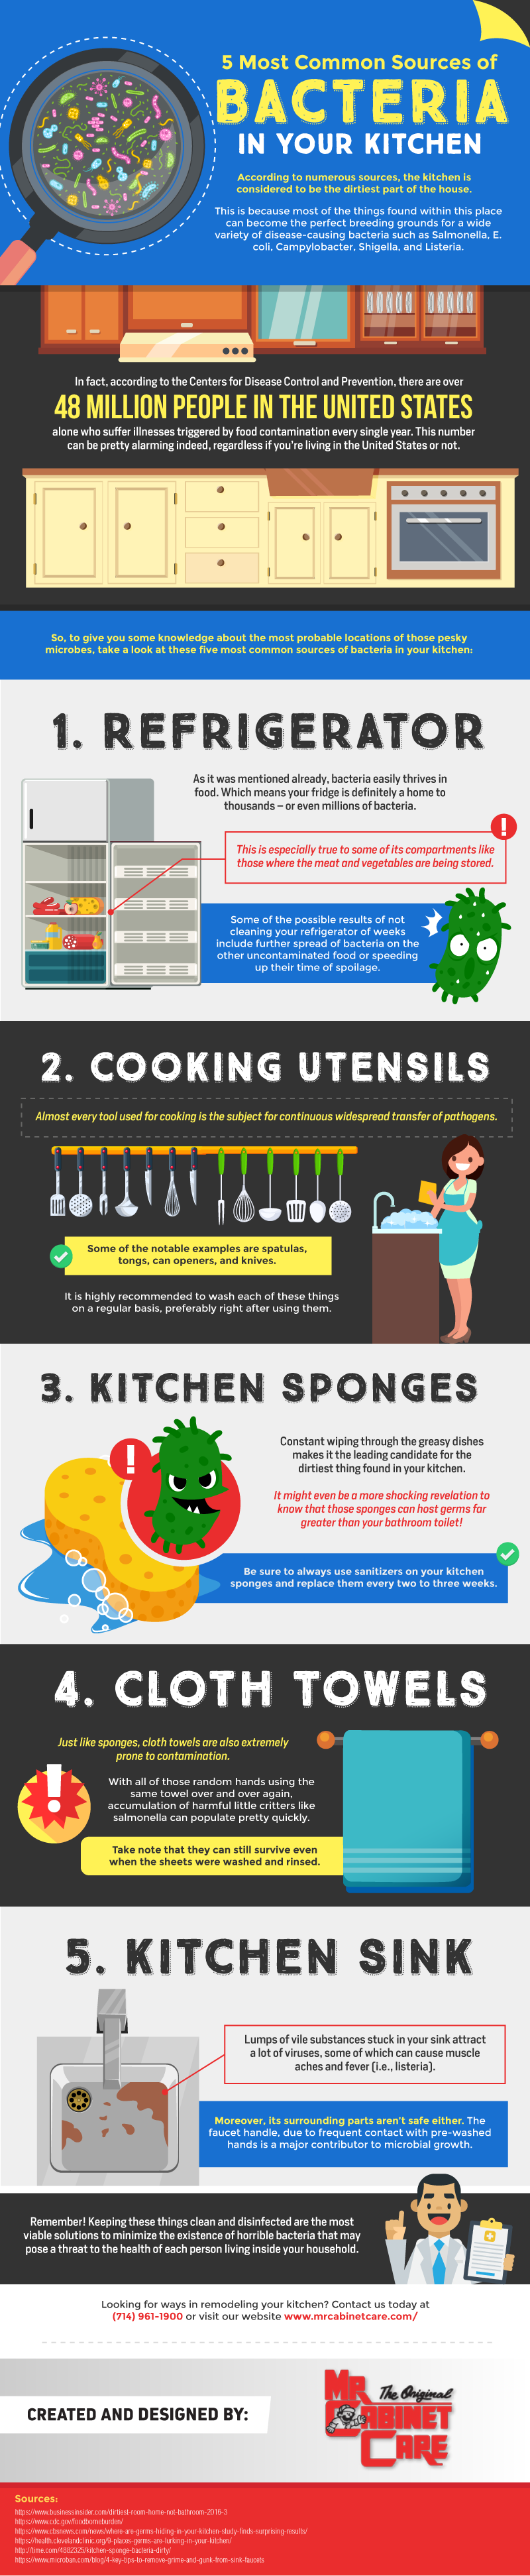 5 Most Common Sources of Bacteria in Your Kitchen - Infographic